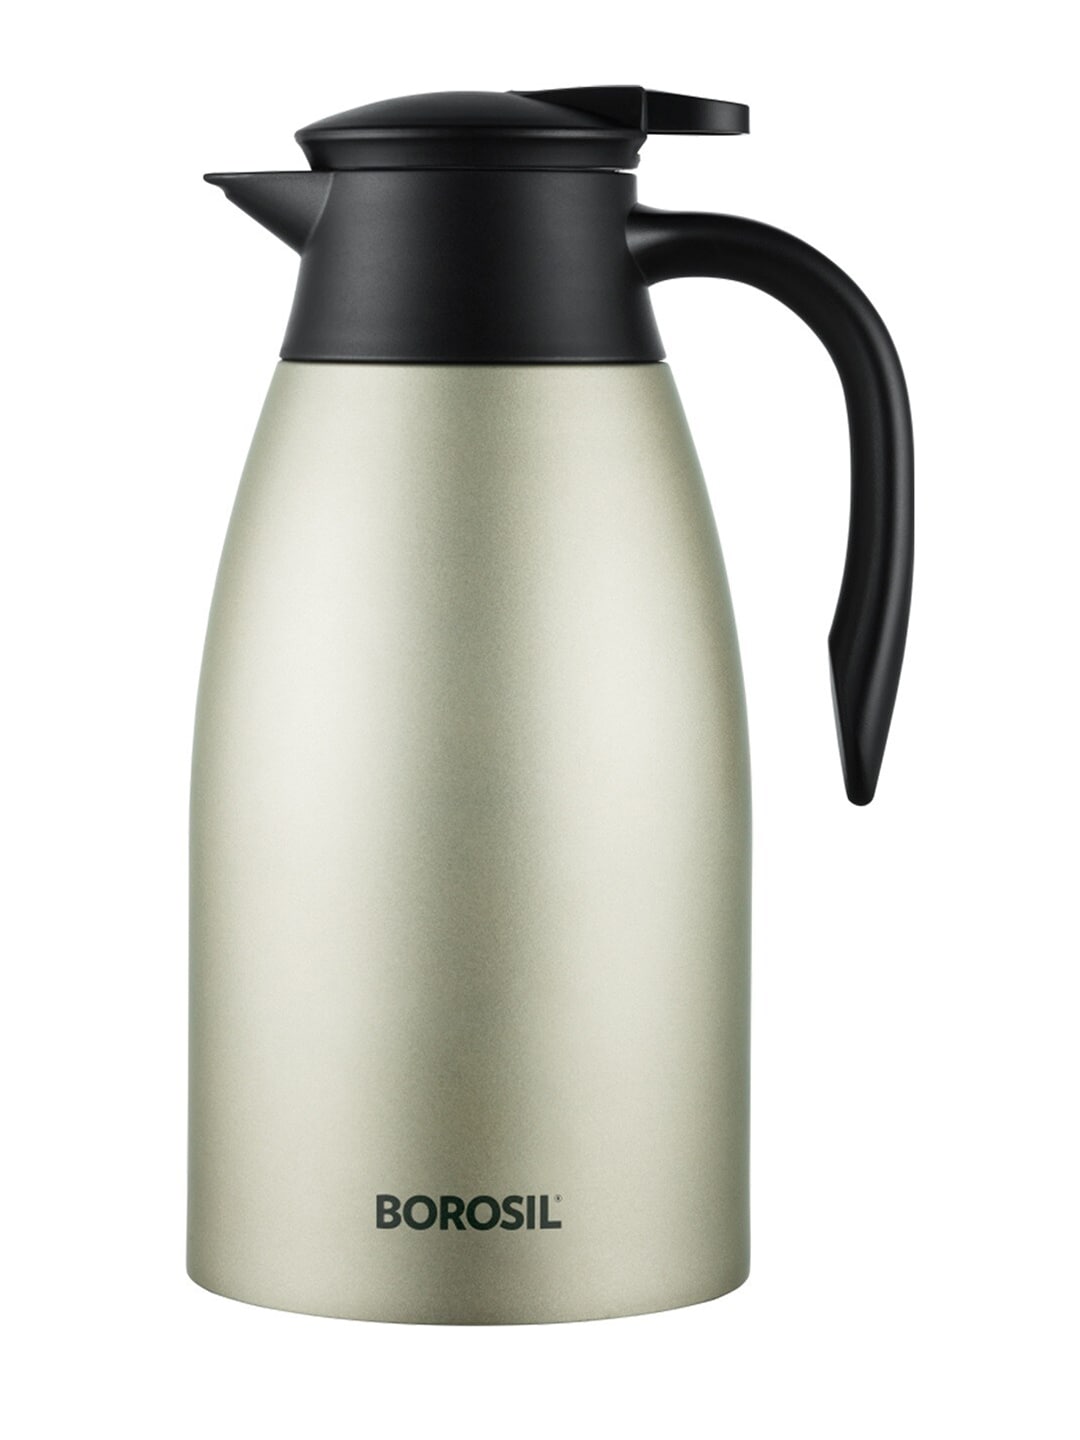 BOROSIL Silver-Toned & Black Solid Stainless Steel Matte Kettle Set of Cups and Mugs Price in India